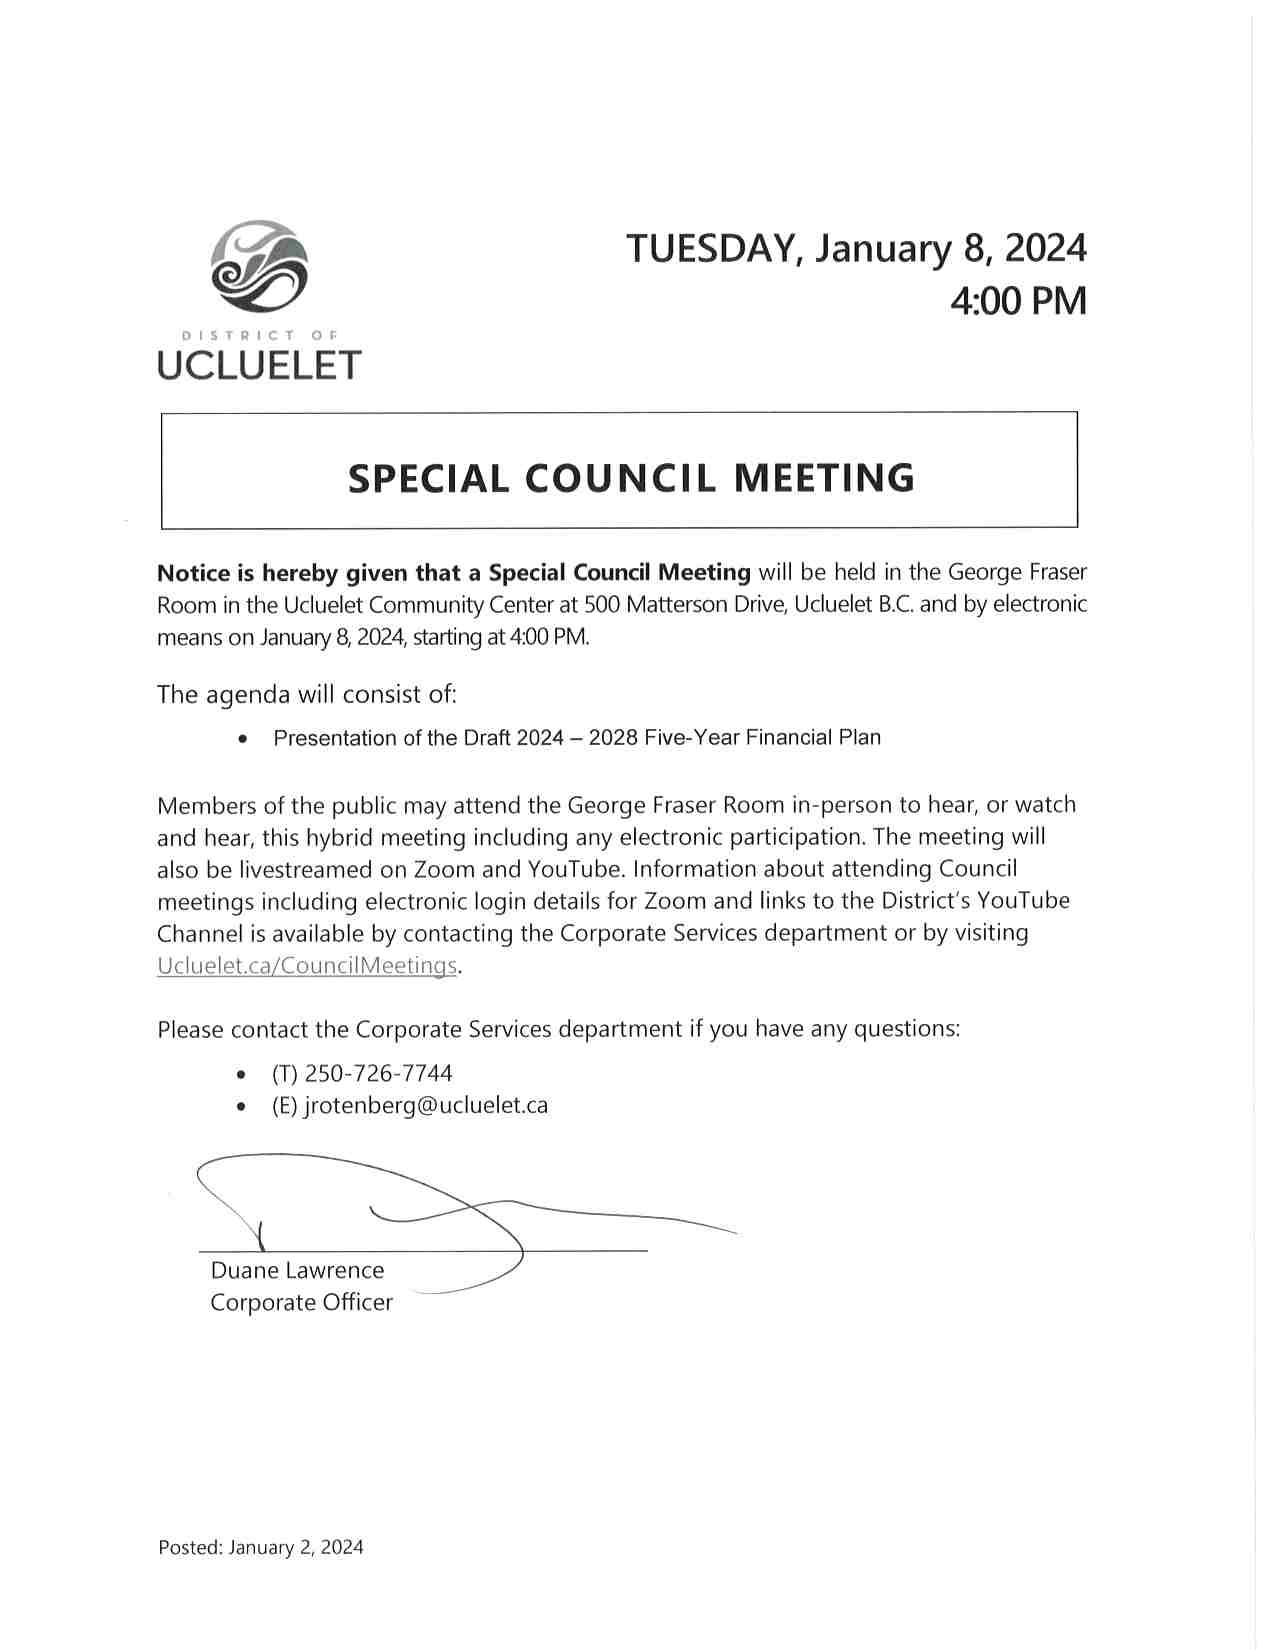 2024-01-08_Special_Meeting_Notice.png